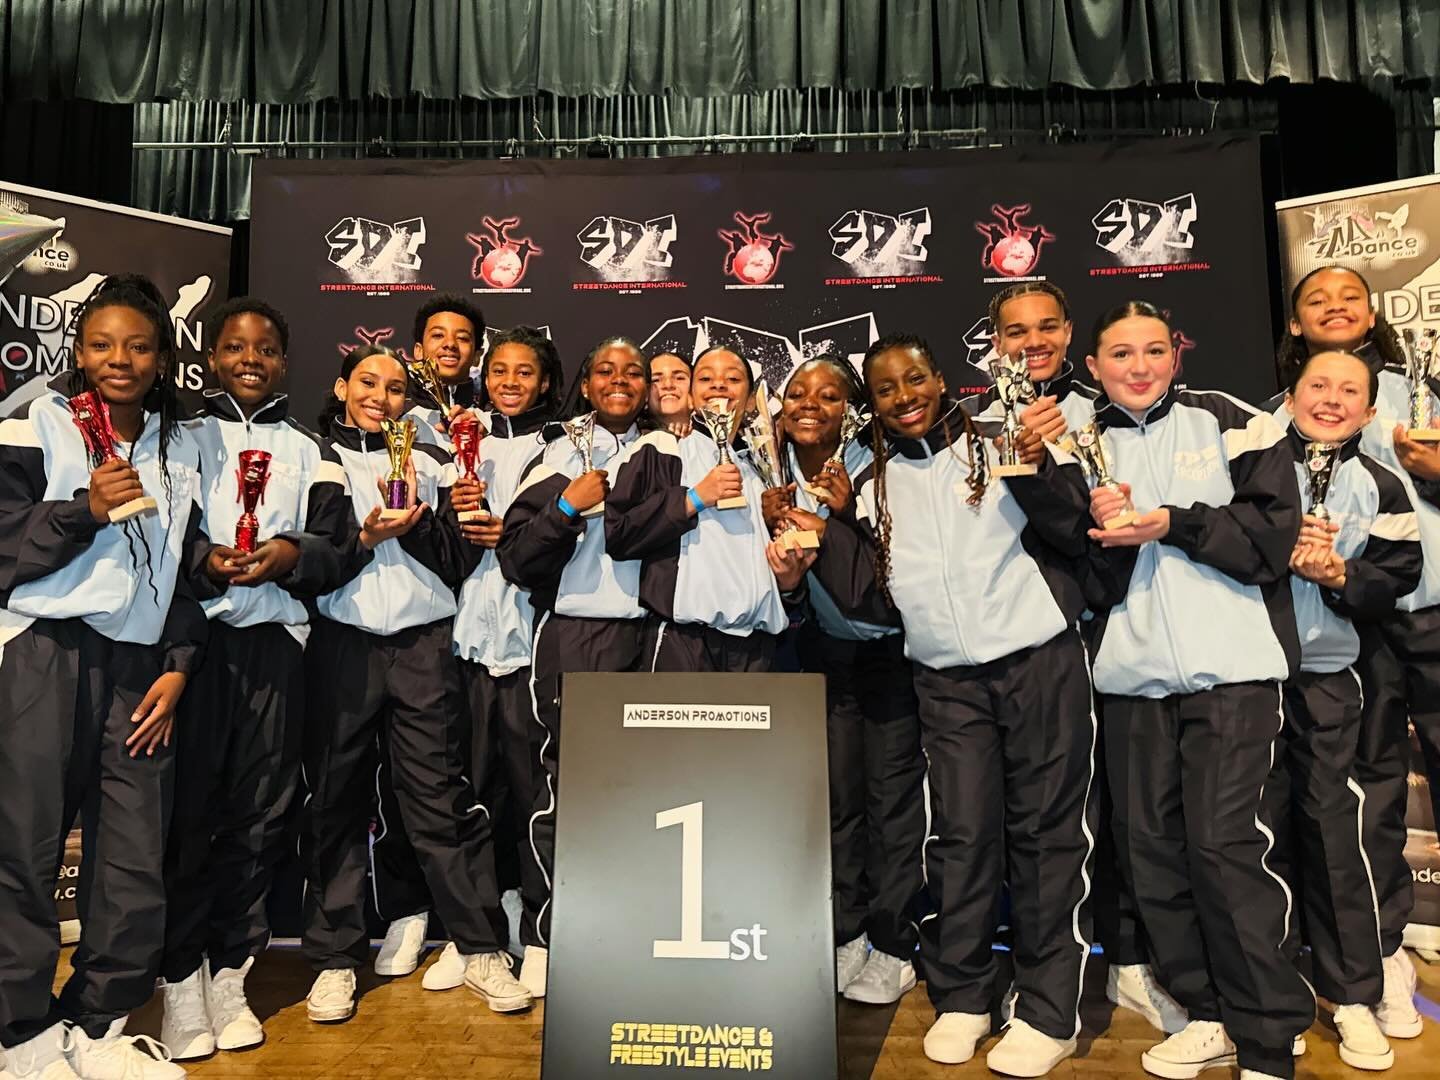 Congratulations to all our troops who placed 1st and 2nd today at SDI Dance competition today!🙌🔥🏆
-
-
-
-
#platinumteam #northlondon #cultureinenfield #enjoyenfield #edmontongreen #workshop #winchmorehill #enfieldtown #acting #performingarts #musi